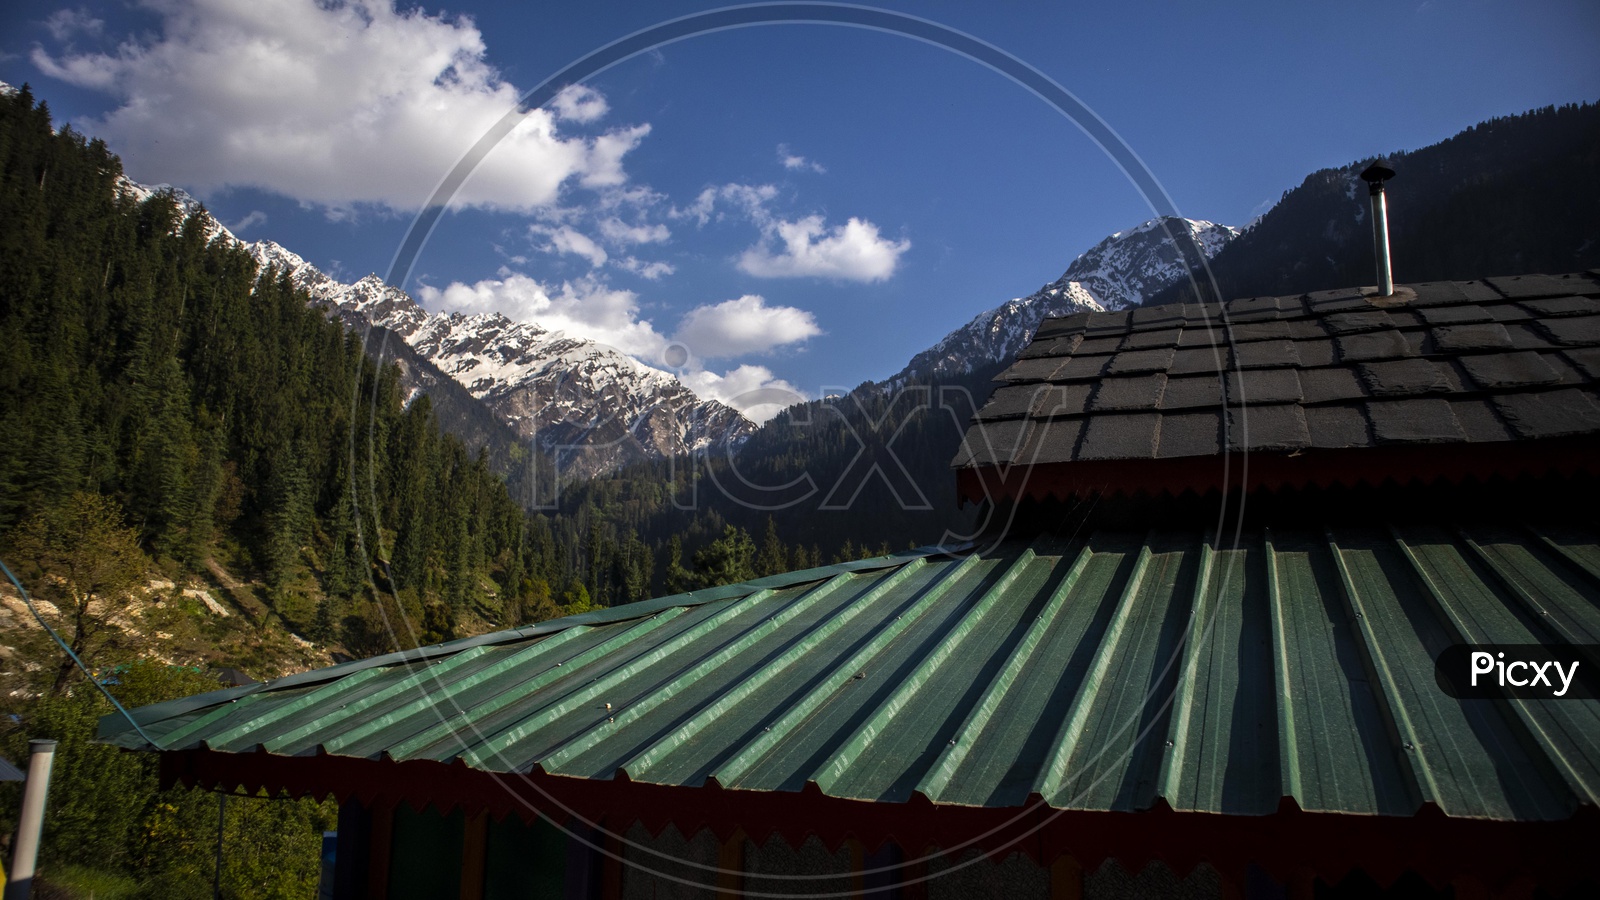 A View Of Snow Capped Mountains From The Roofs Of Village Huts In Leh